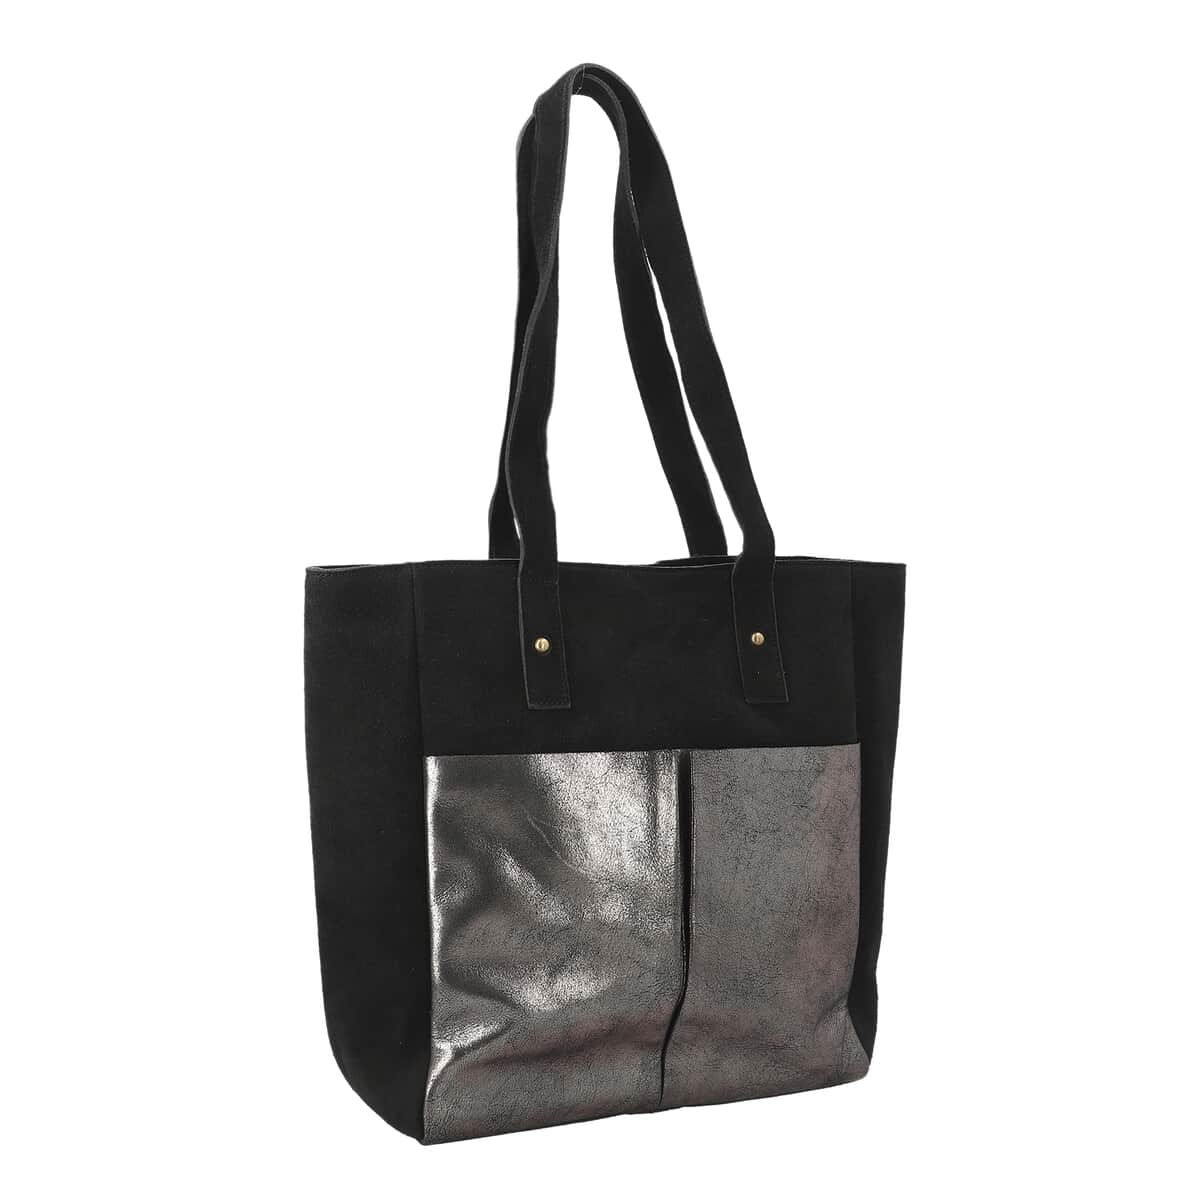 "100% Genuine Leather Tote Bag Color:Black Size: 11.5Lx13Hx4W INCH" image number 3